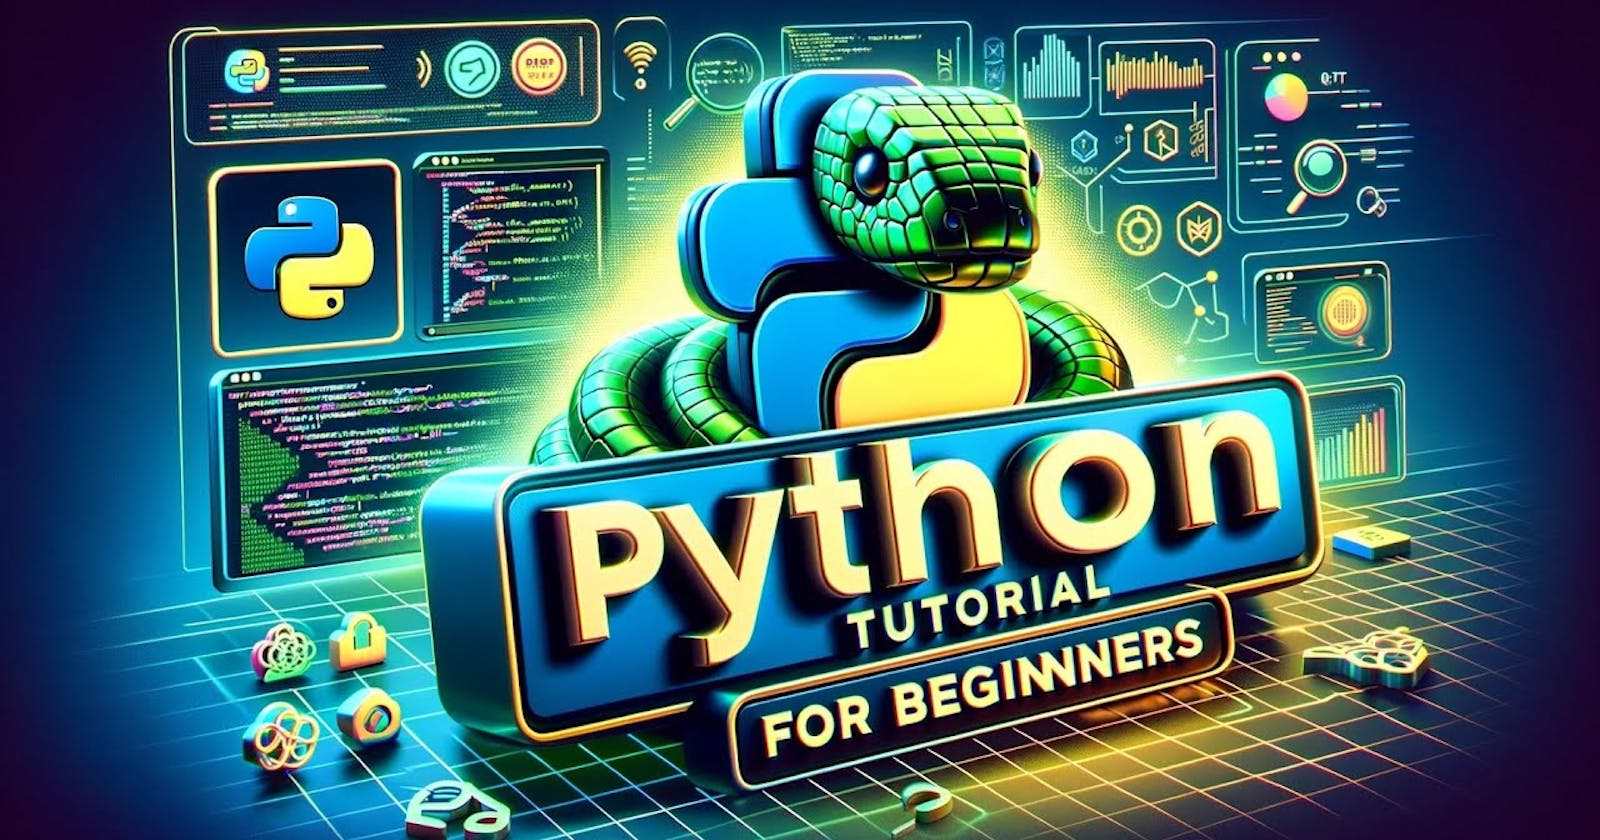 #Day 13 Python For Beginners.